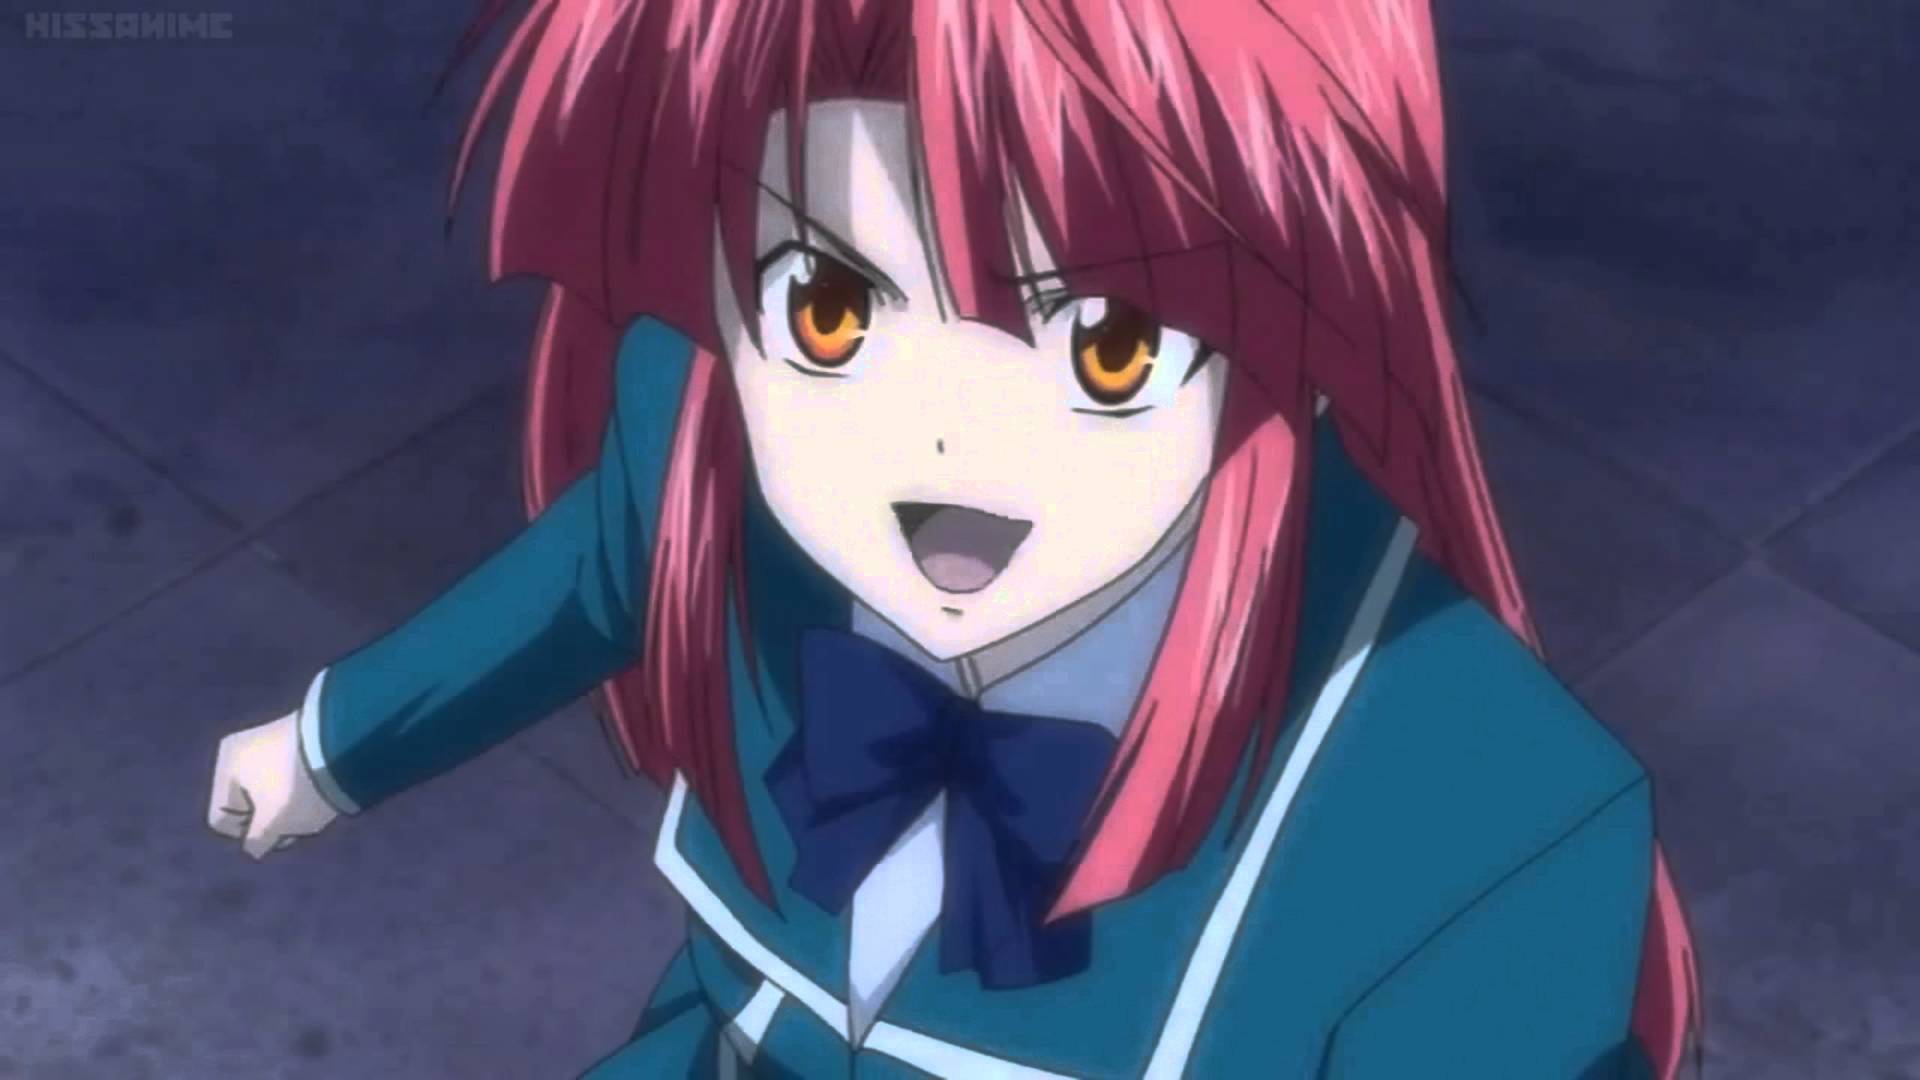 Kaze no Stigma getting hotel dropped on her face Dubbed